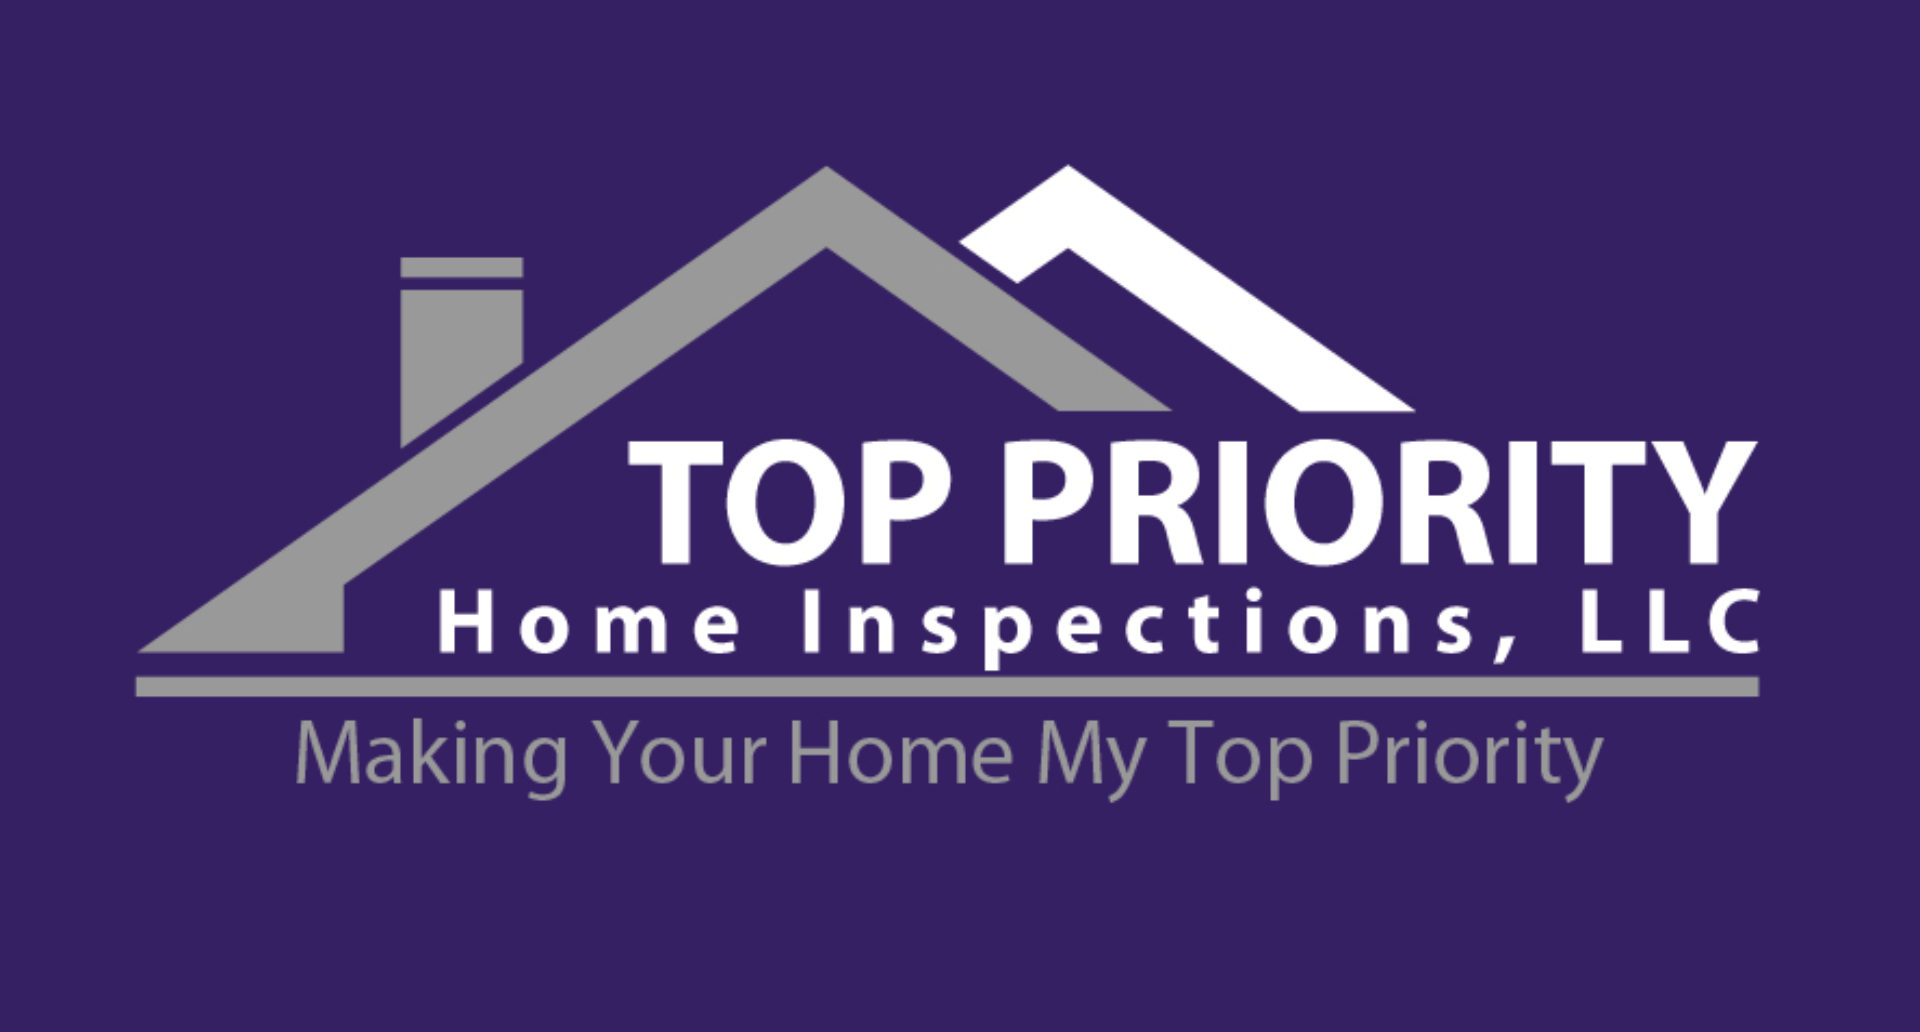 Top Priority Home Inspections, LLC